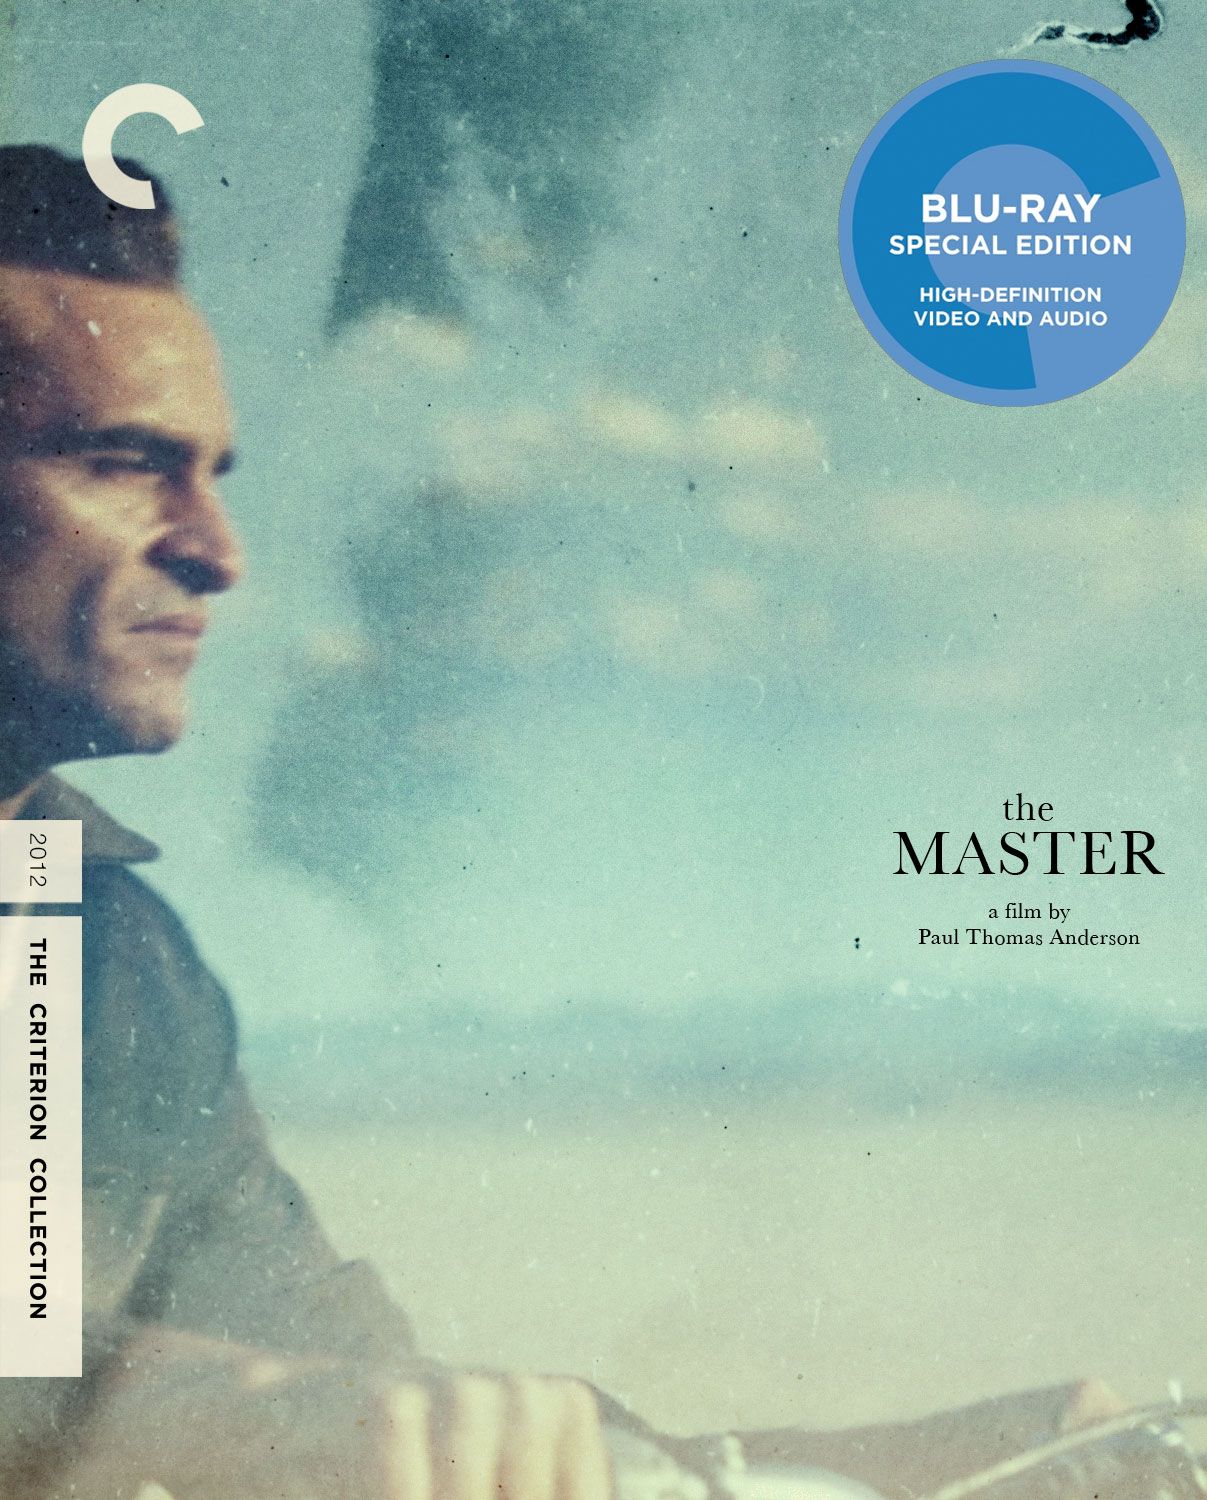 The Criterion Collection - The Master - Cover Design #3